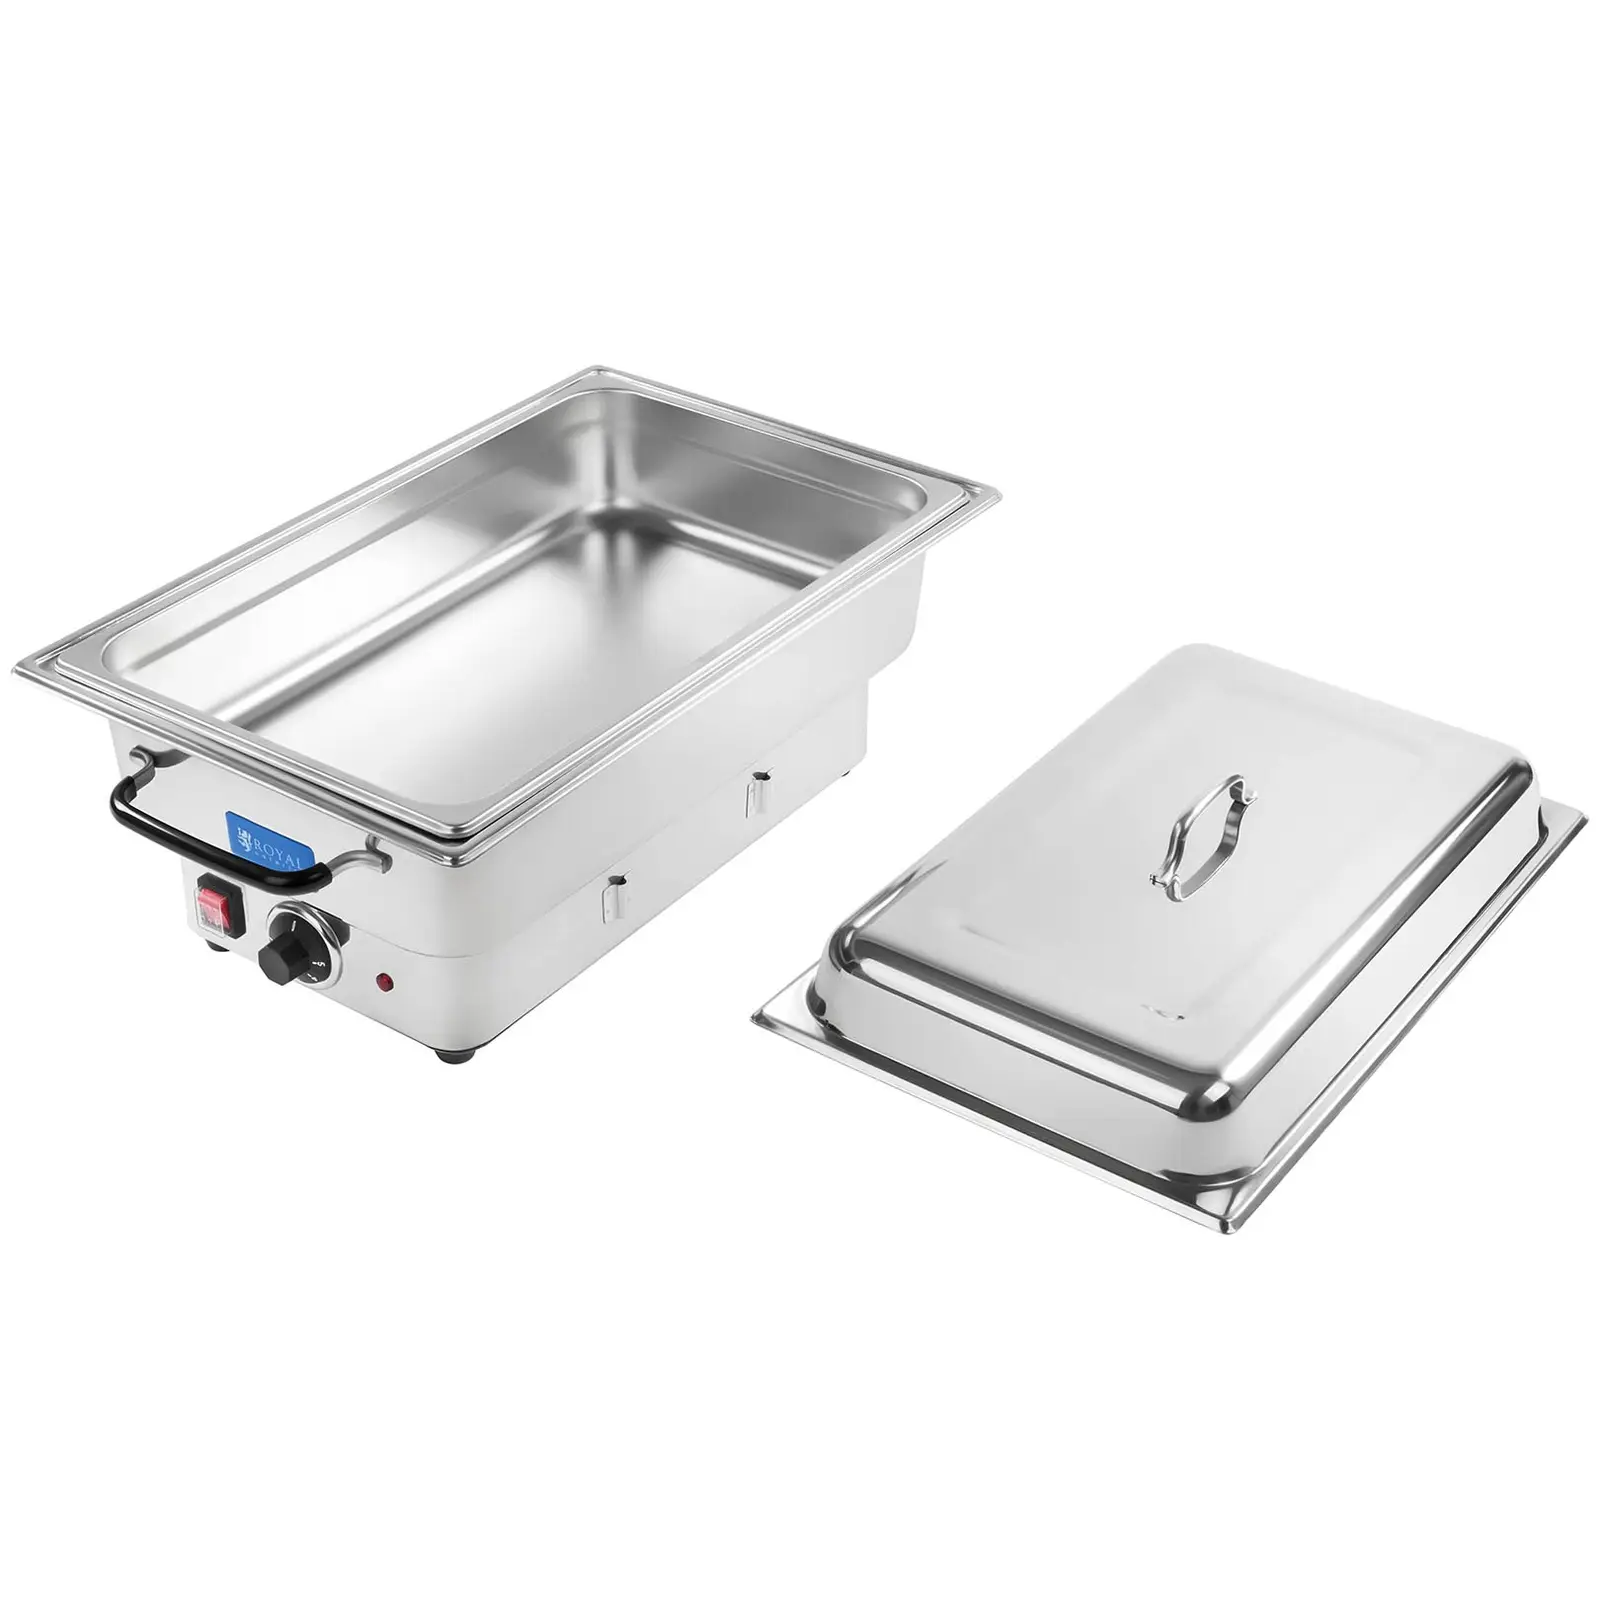 Chafing dish - 1 600 W - Bac GN 1/1 - 100 mm